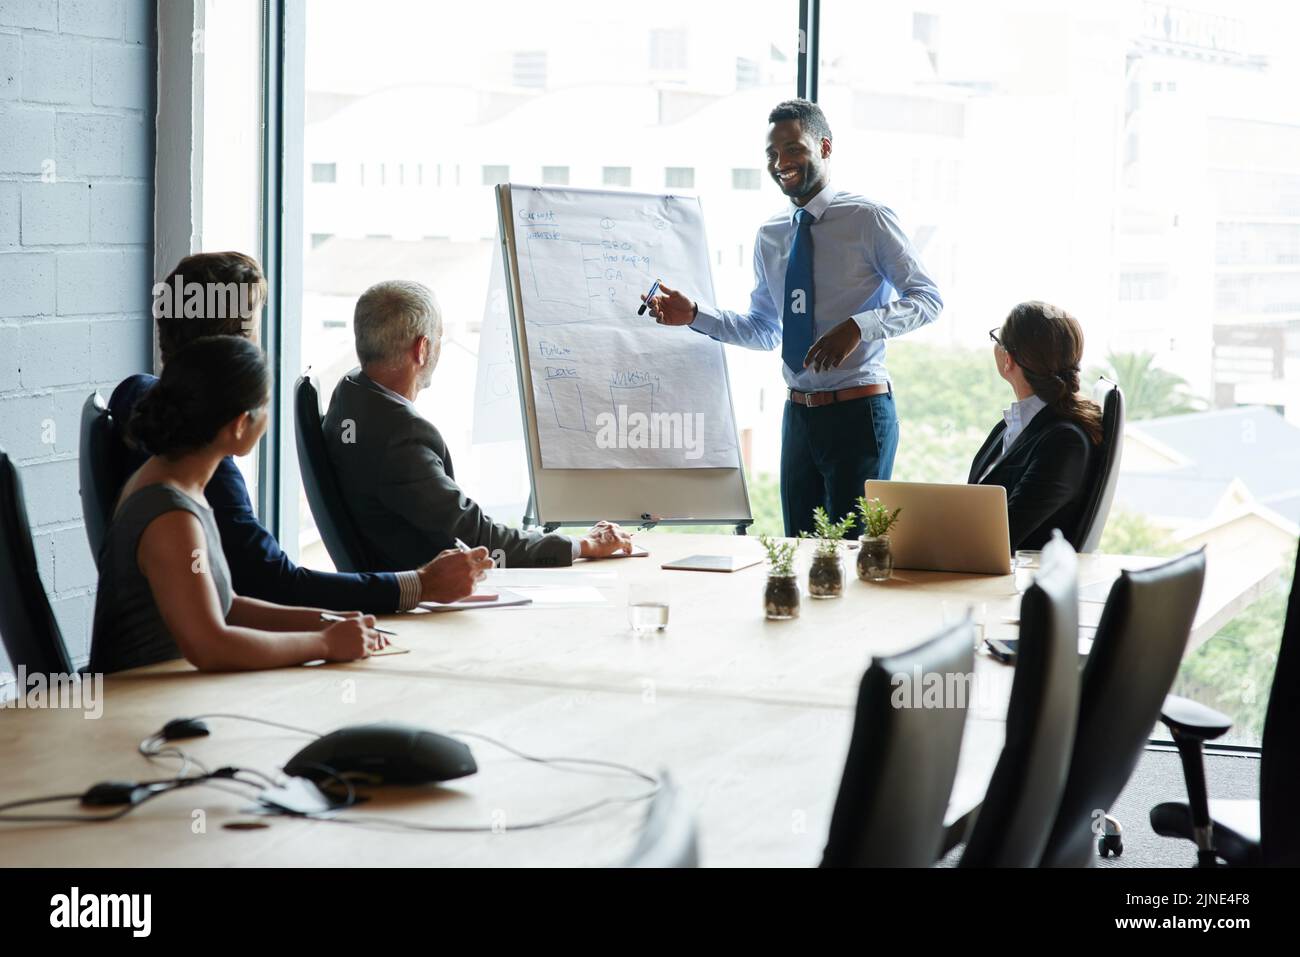 Young black man doing leadership presentation on innovation at business shareholder meeting in office. Diverse work colleague group talking about Stock Photo